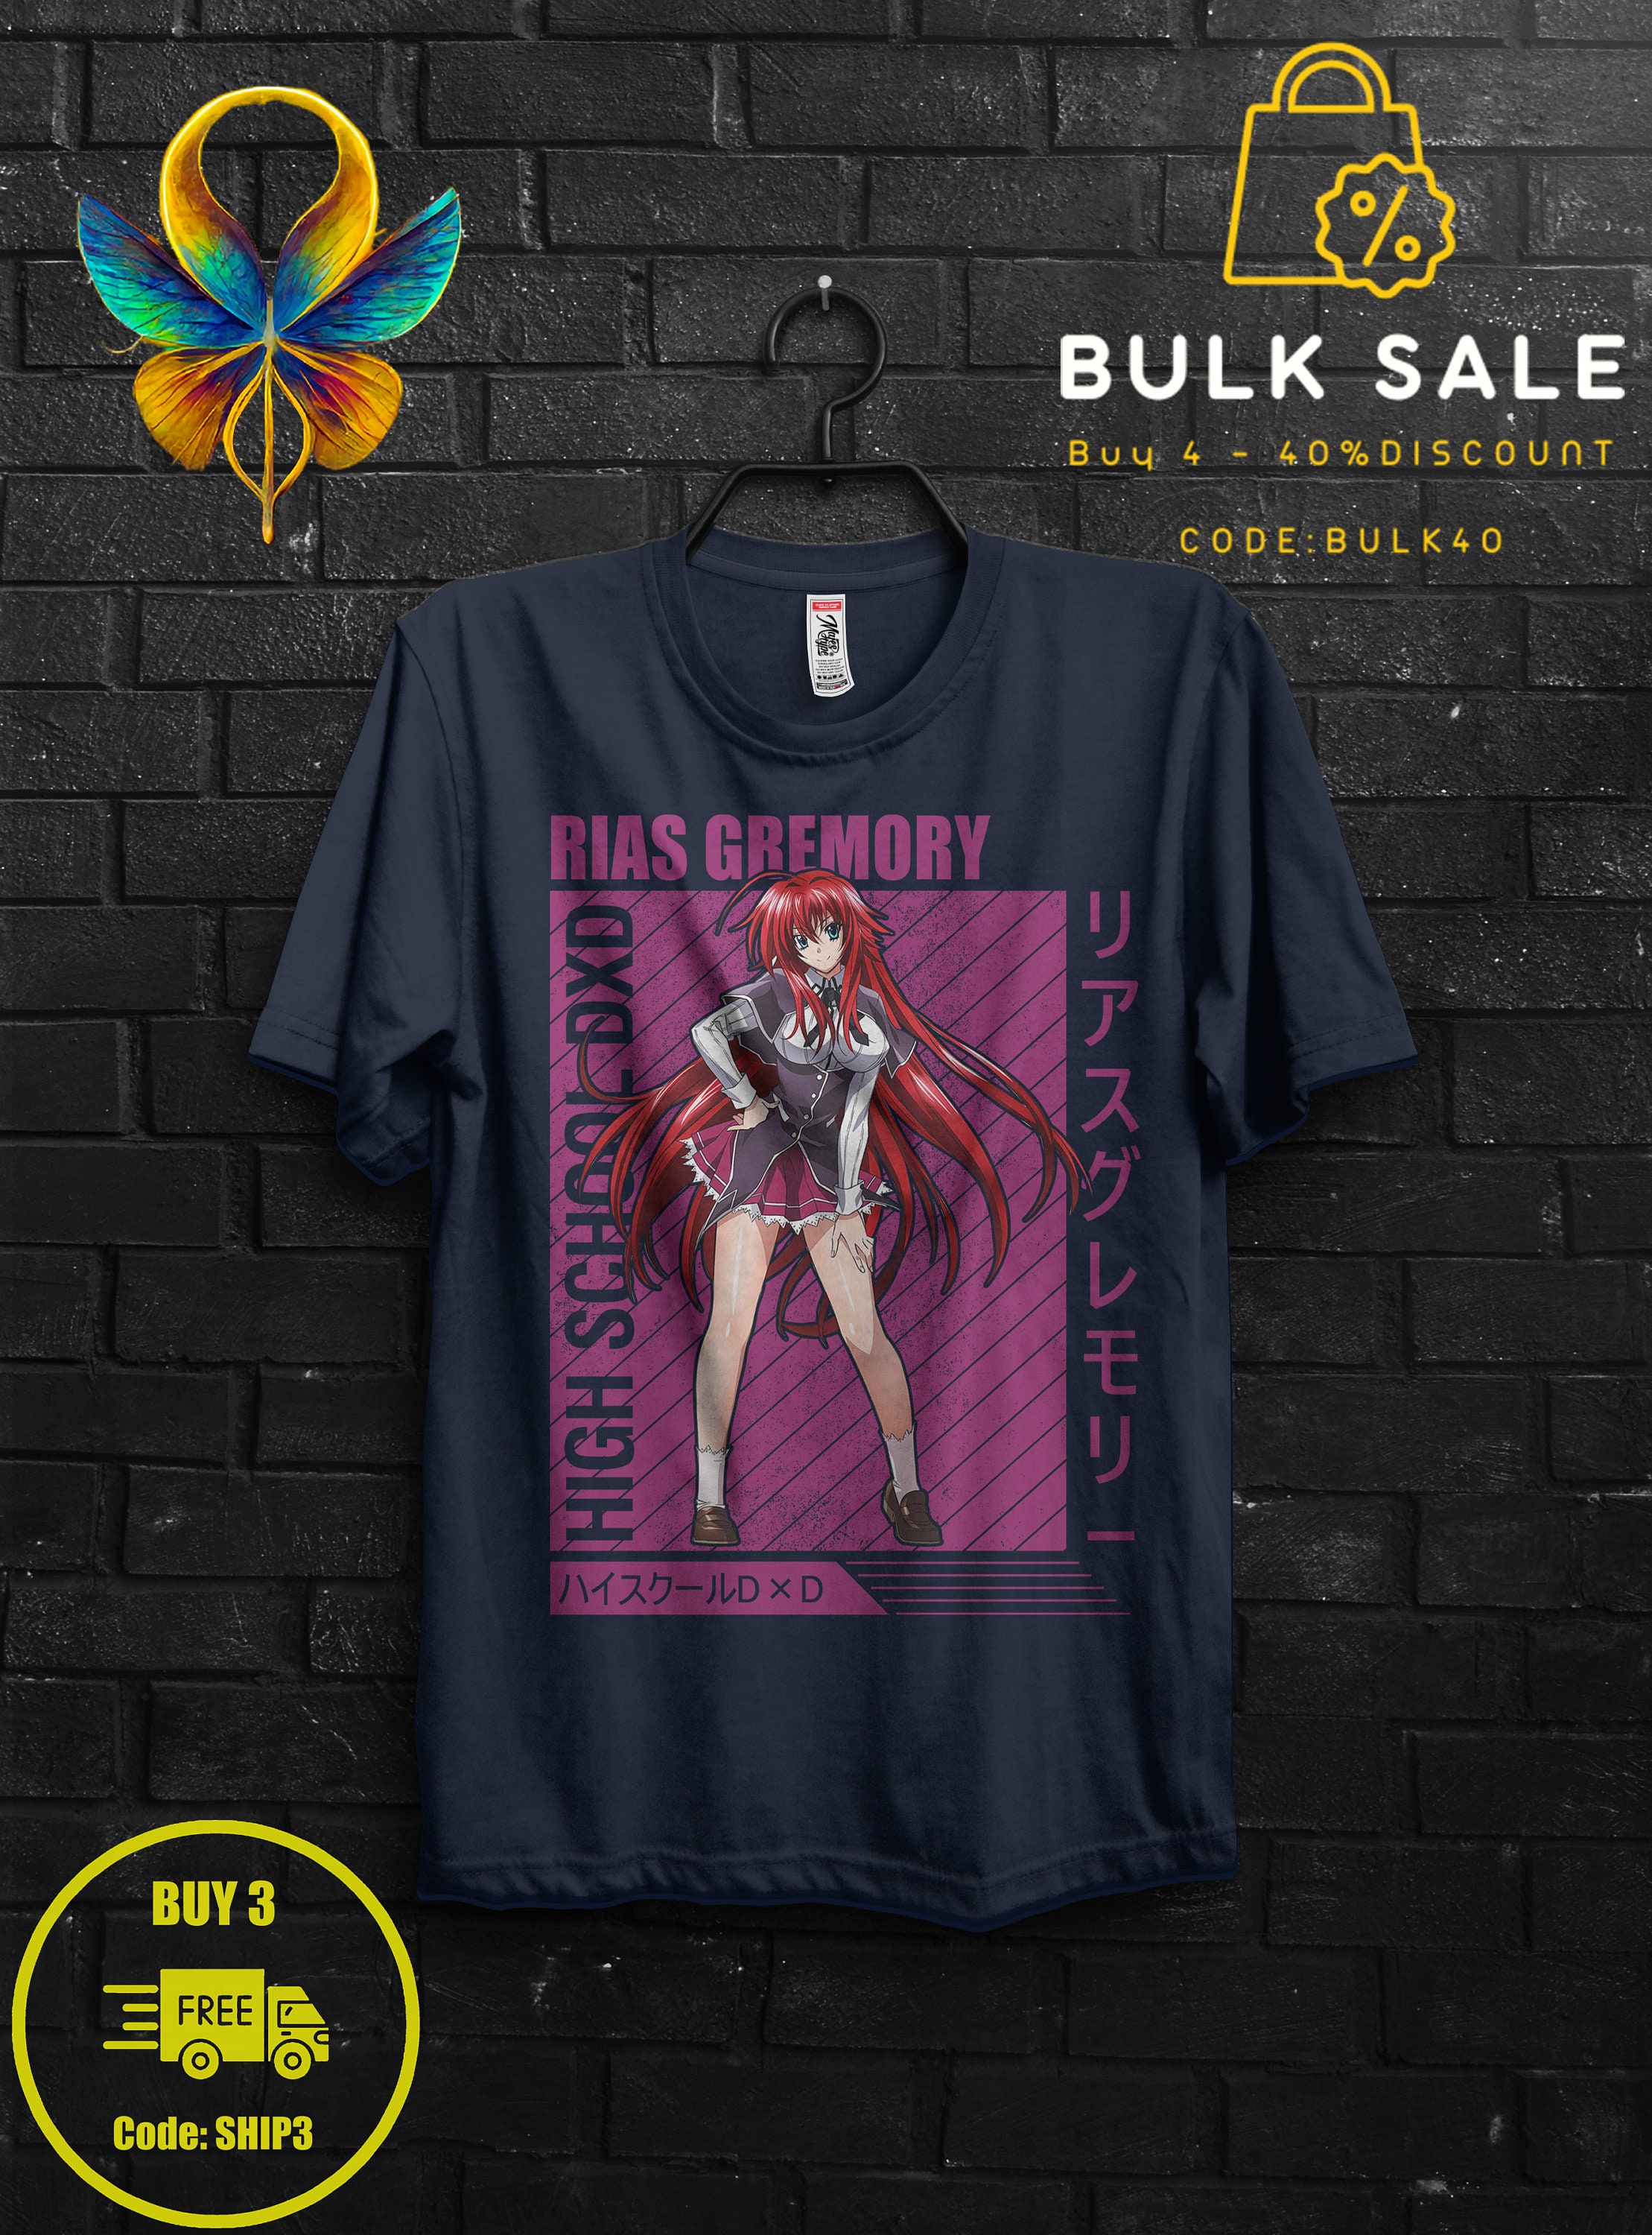 Rias Gremory Shirt Anime Gift Cosplay For Girl,Rossweisse Tshirt For Sitri,High School DxD Tee,Xenovia Appareal For Her,Issei Hyoudou Sweat 1586079732